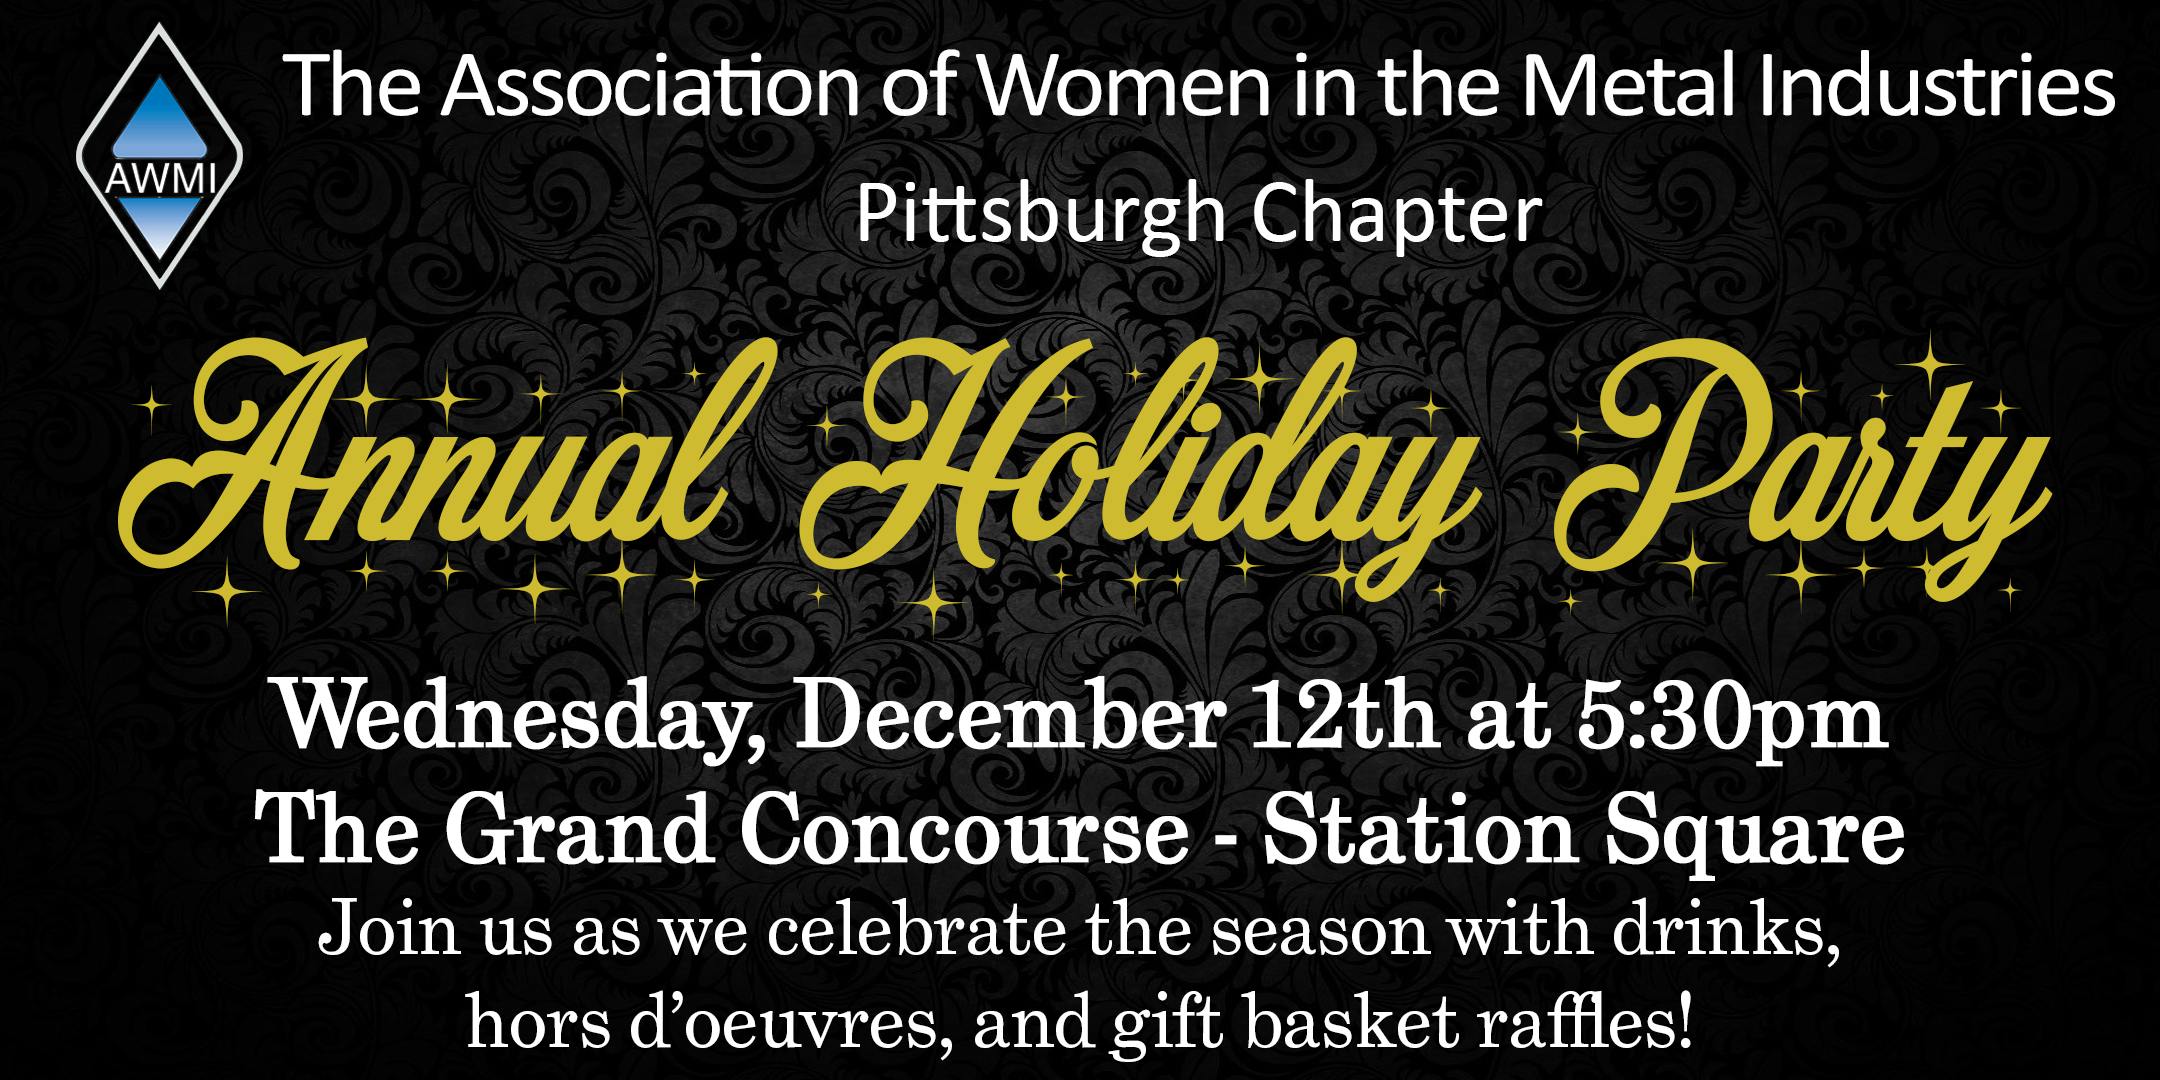 AWMI Pittsburgh - Annual Holiday Party!